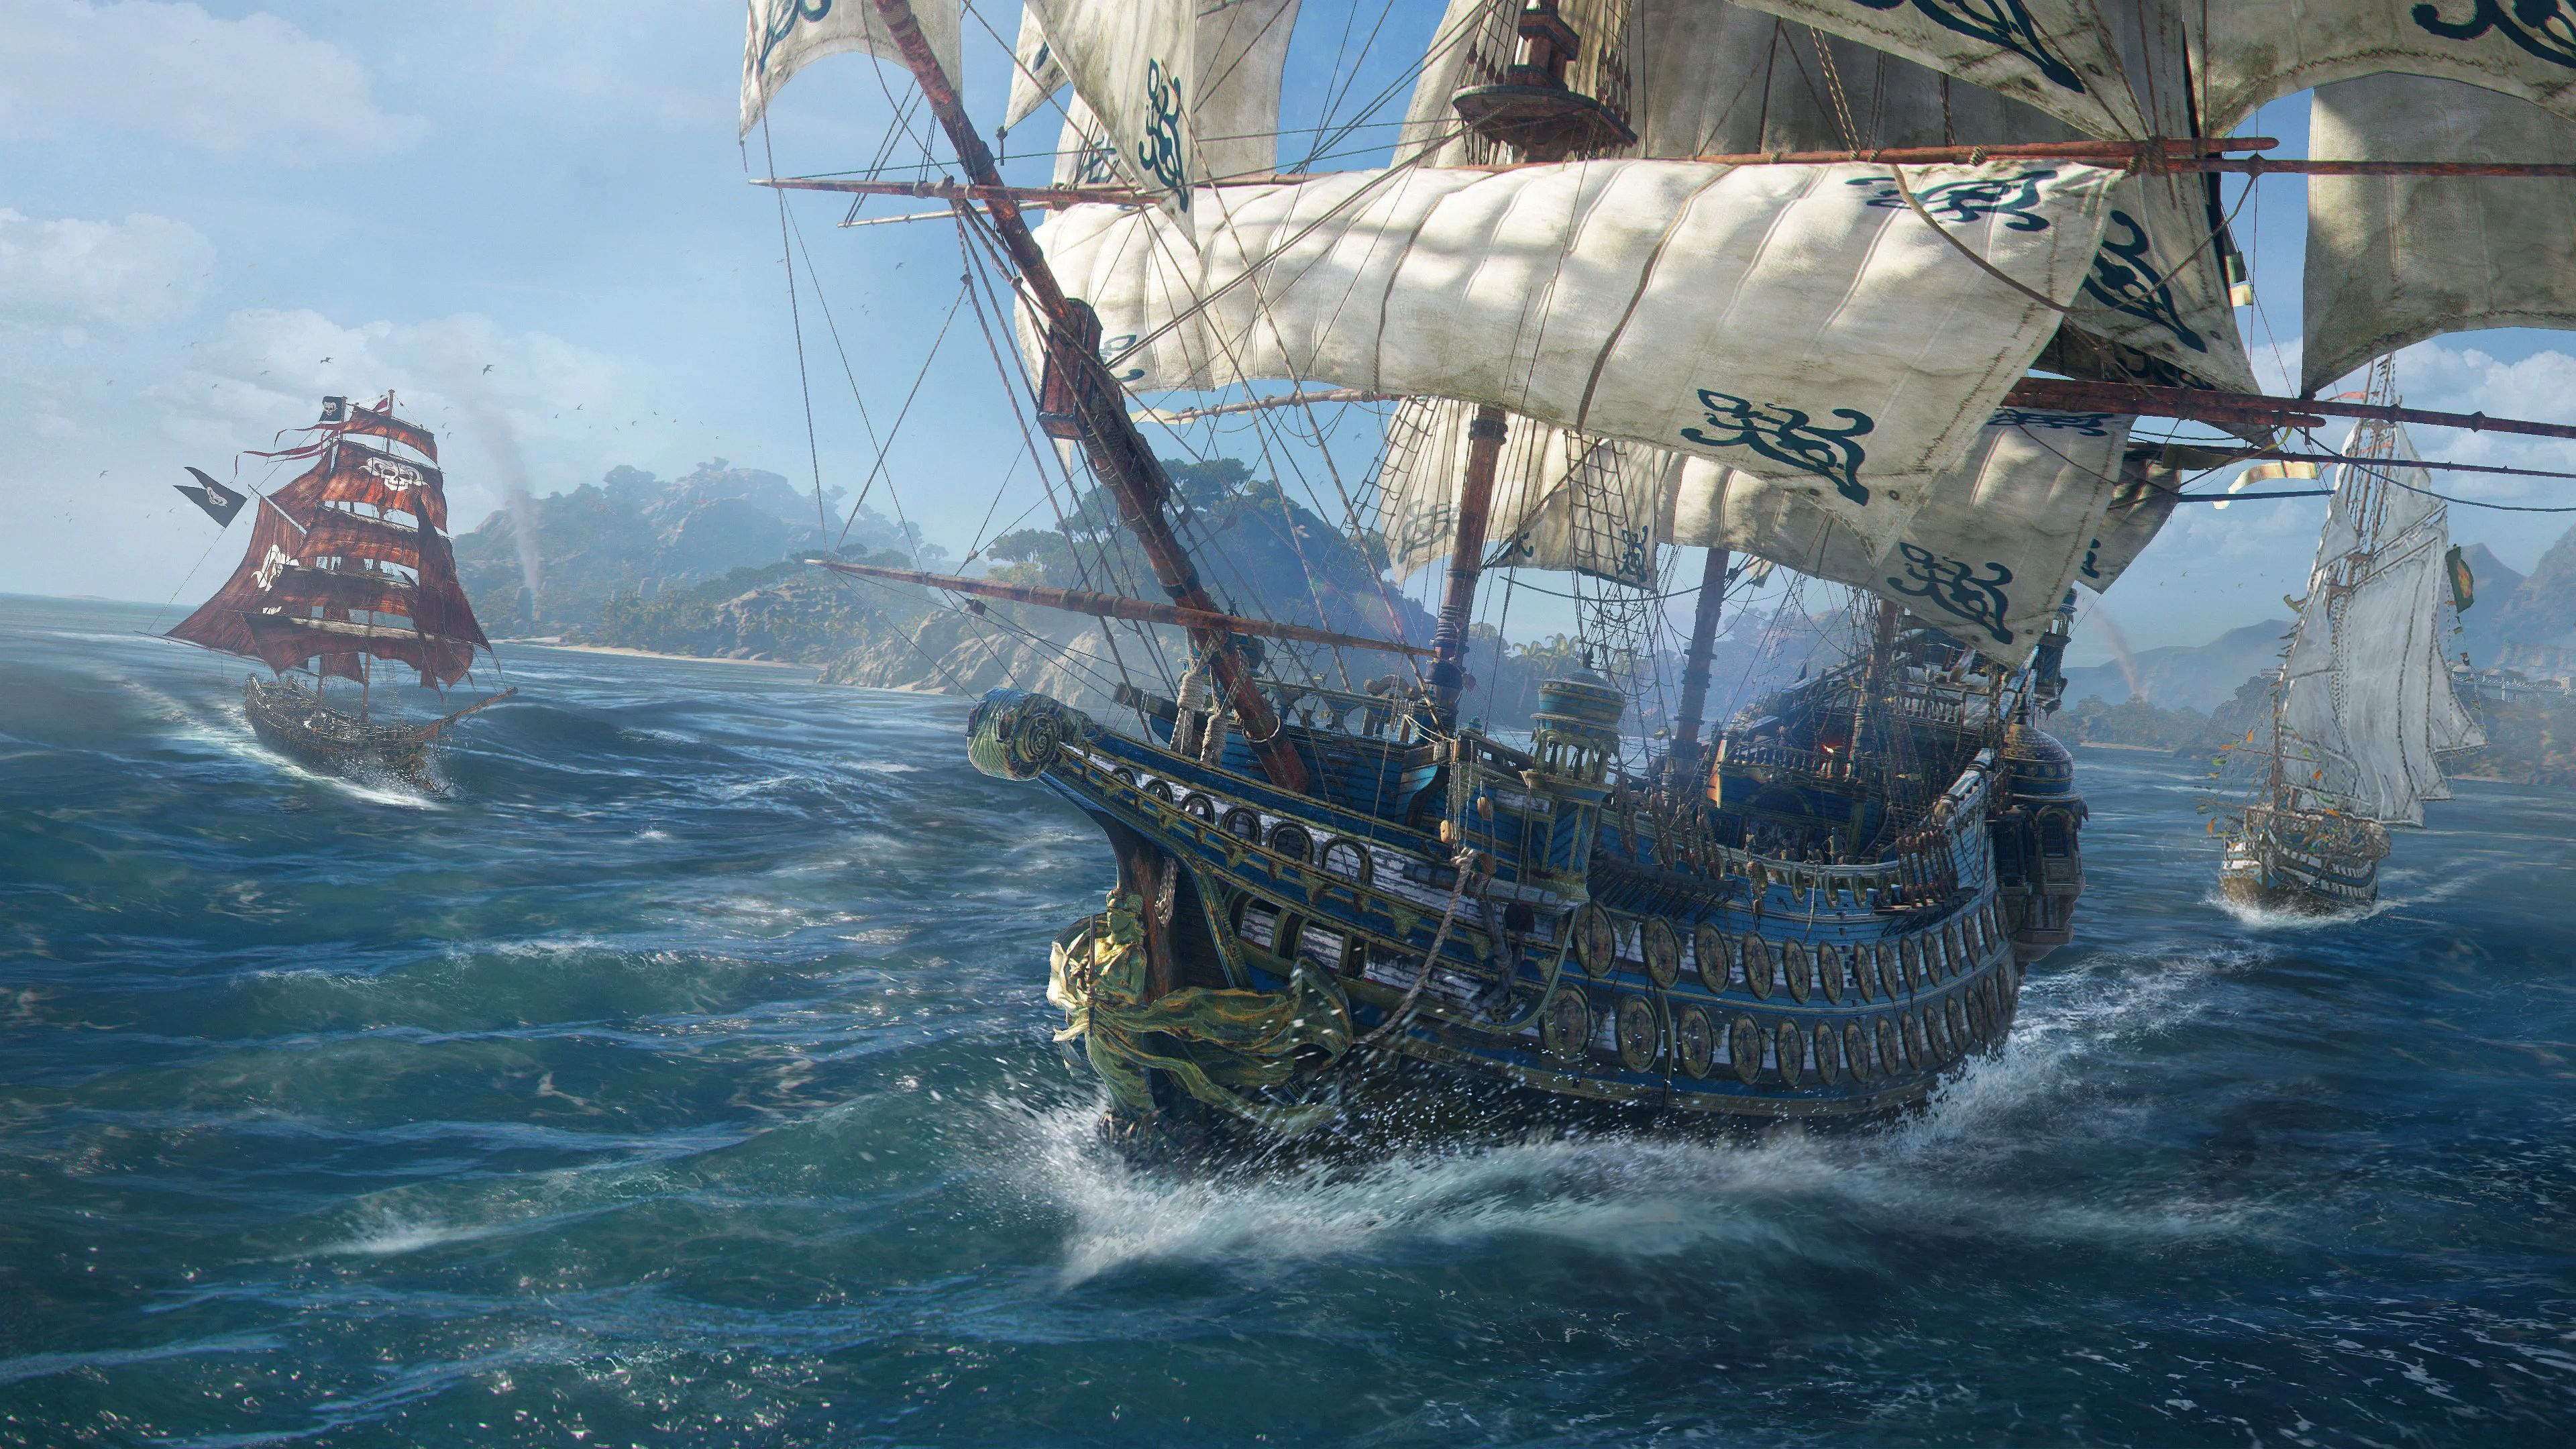 Image for Rumor has it Skull and Bones will be re-revealed in early July